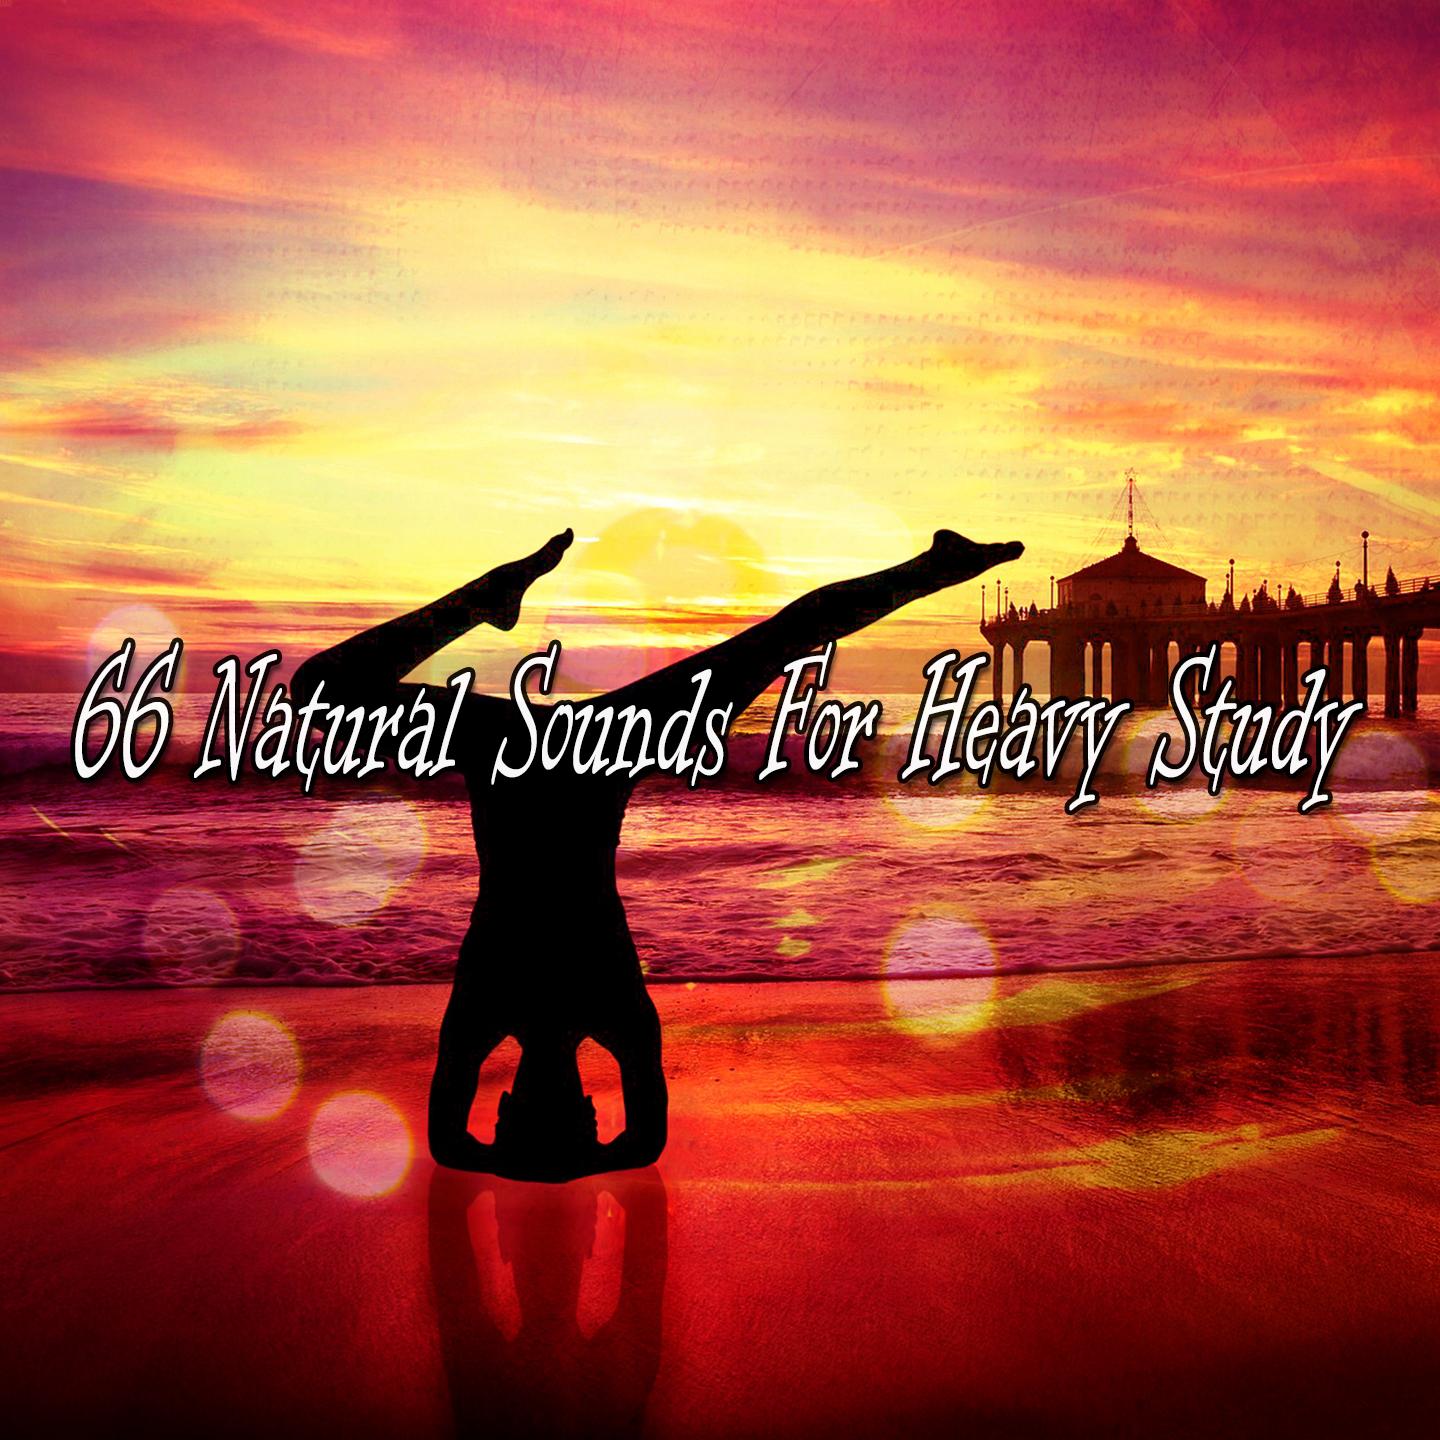 66 Natural Sounds for Heavy Study